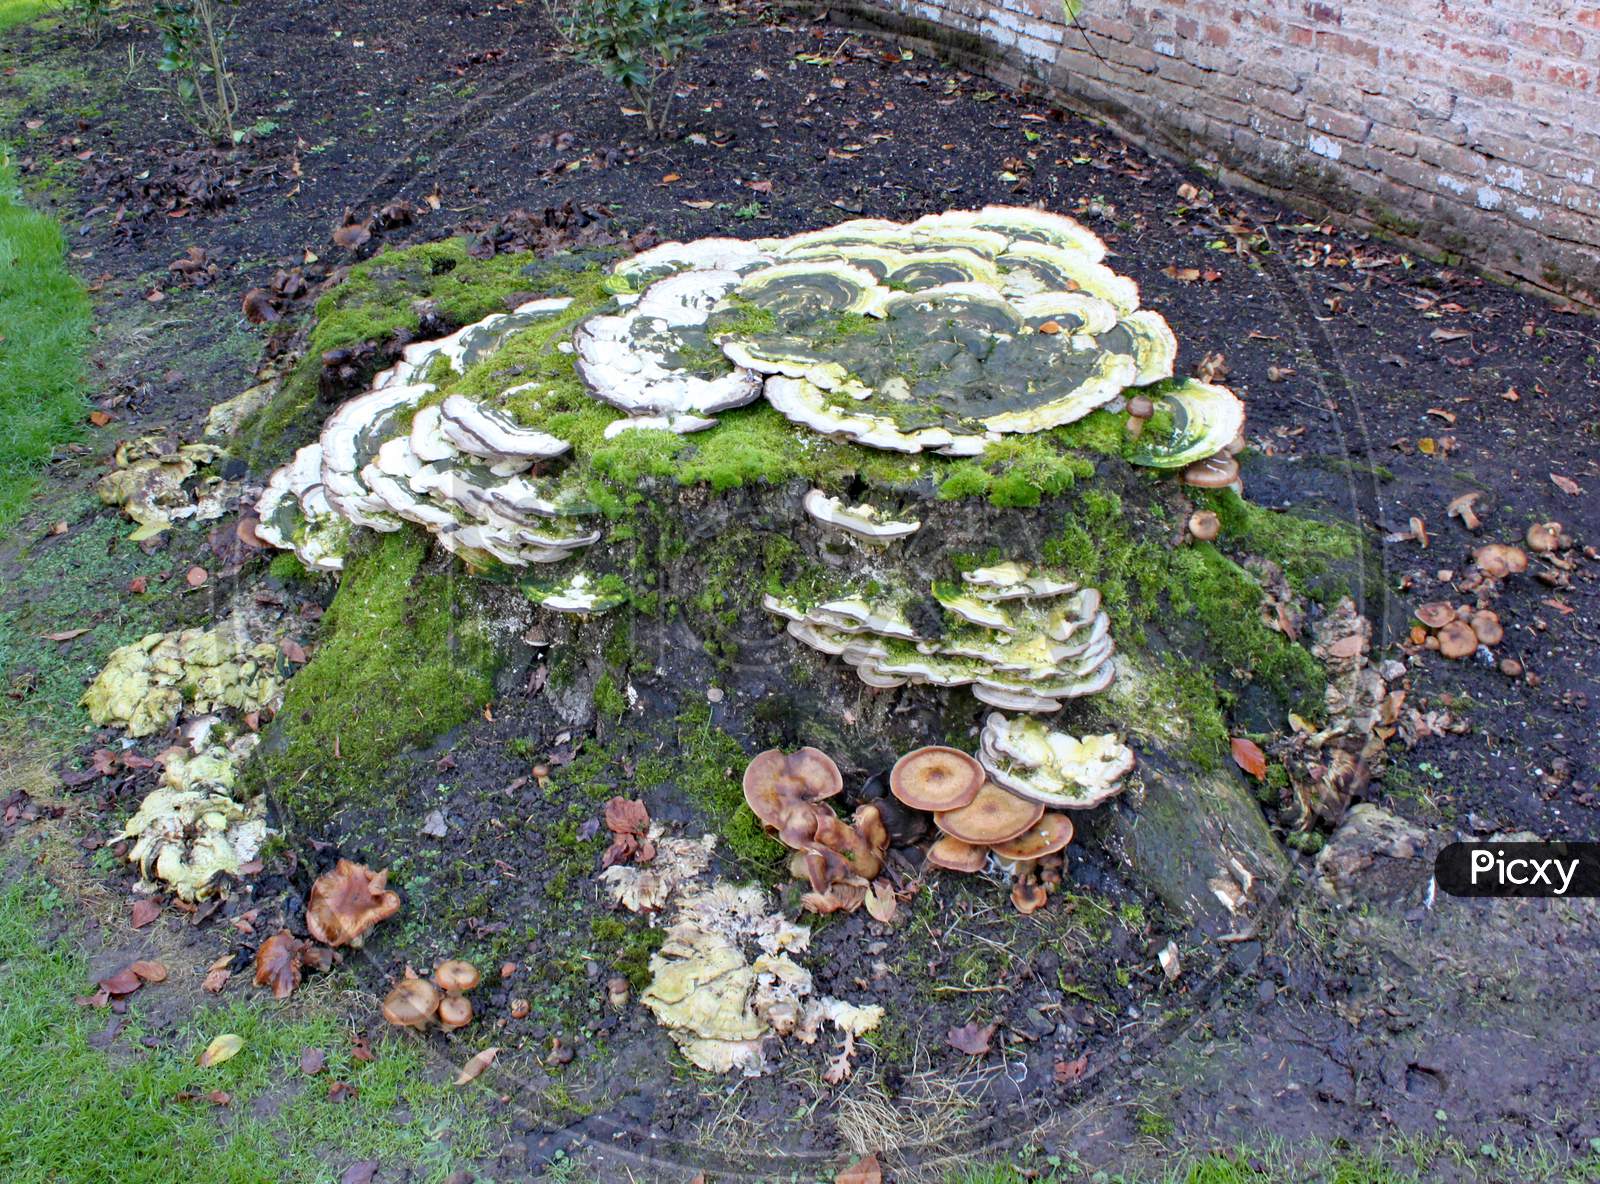 Several Kinds Of Fungi Grow On A Tree Stum At Arley Arboretum In The Midlands In England.